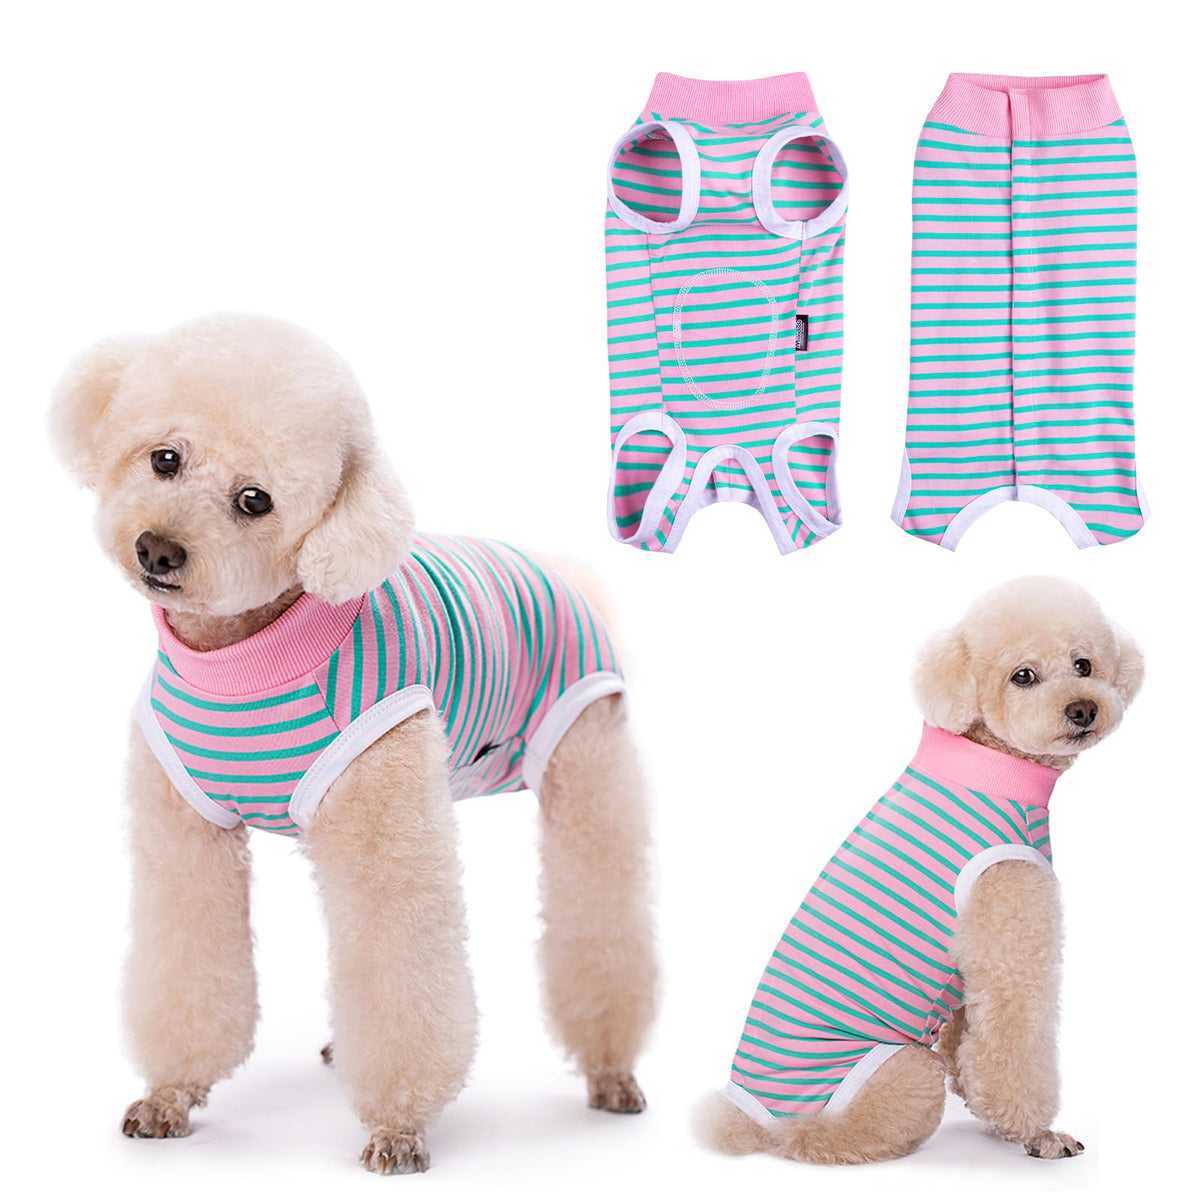 Lyneun Dog Recovery Suit, Striped Dog Surgical Recovery Suit, Soft Dog Surgical Bodysuit, Recovery Suit Dog After Surgery For Allergies, Wound Protection, Cone Alternative (Pink, Small)